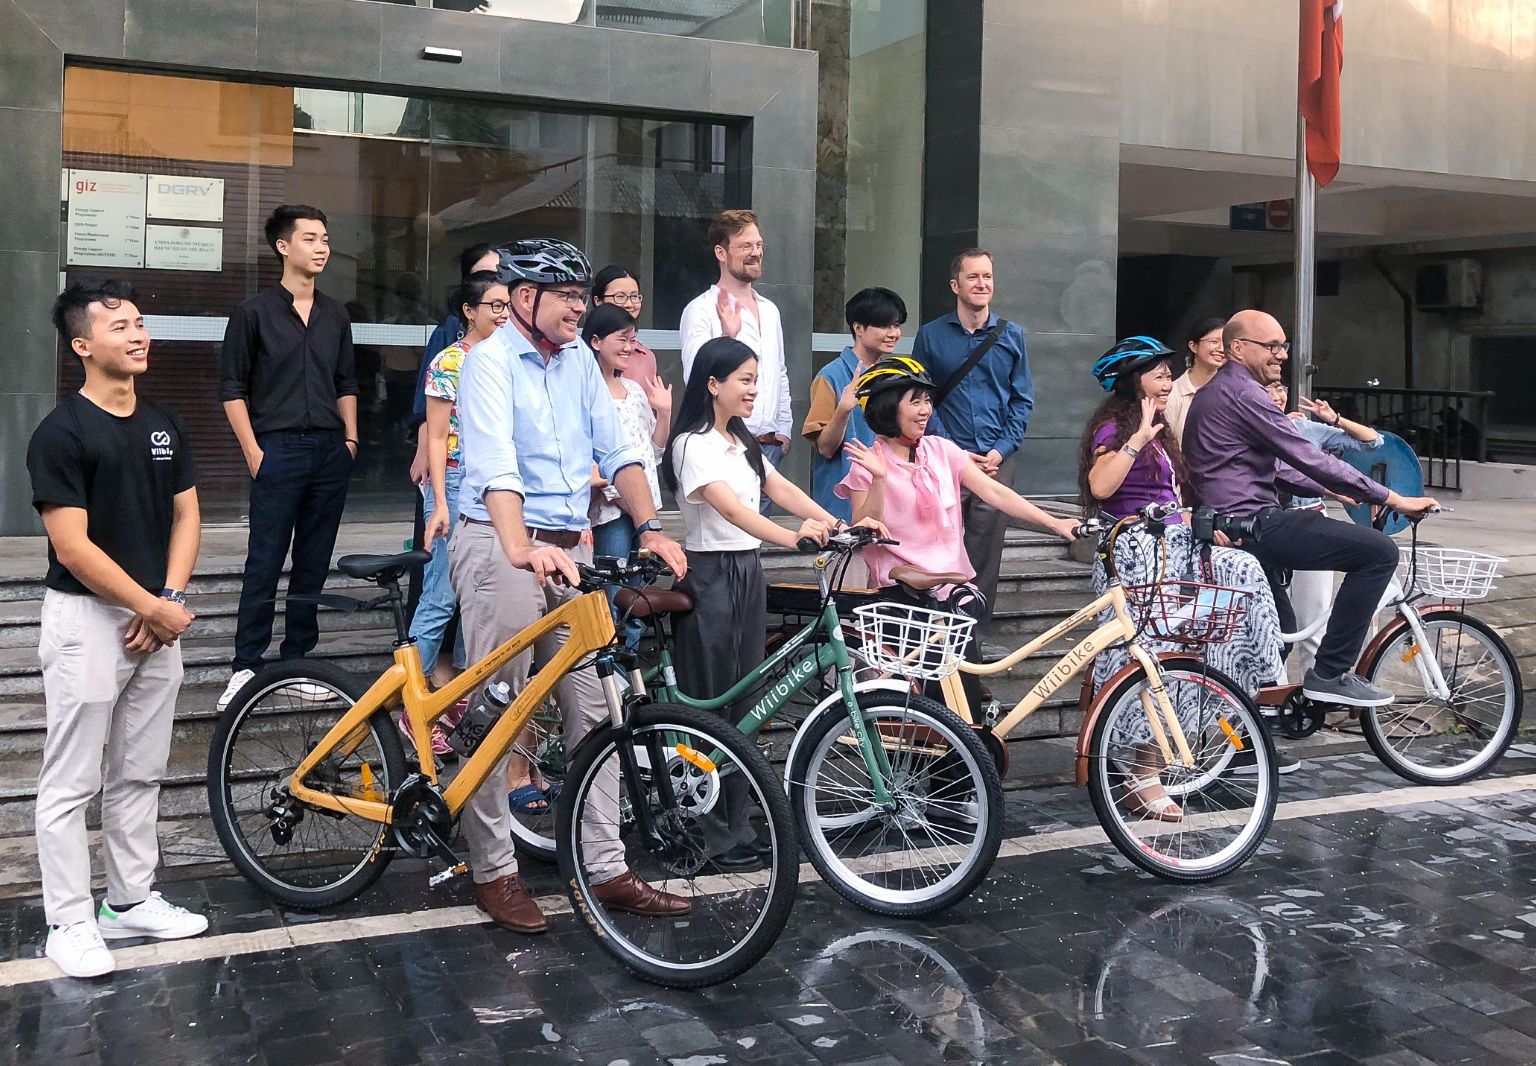 Photo: A group of people, some wearing bicycle helmets, standing in front of a building with the GIZ logo. Everyone is smiling, some are waving. Four people are holding on to bicycles.